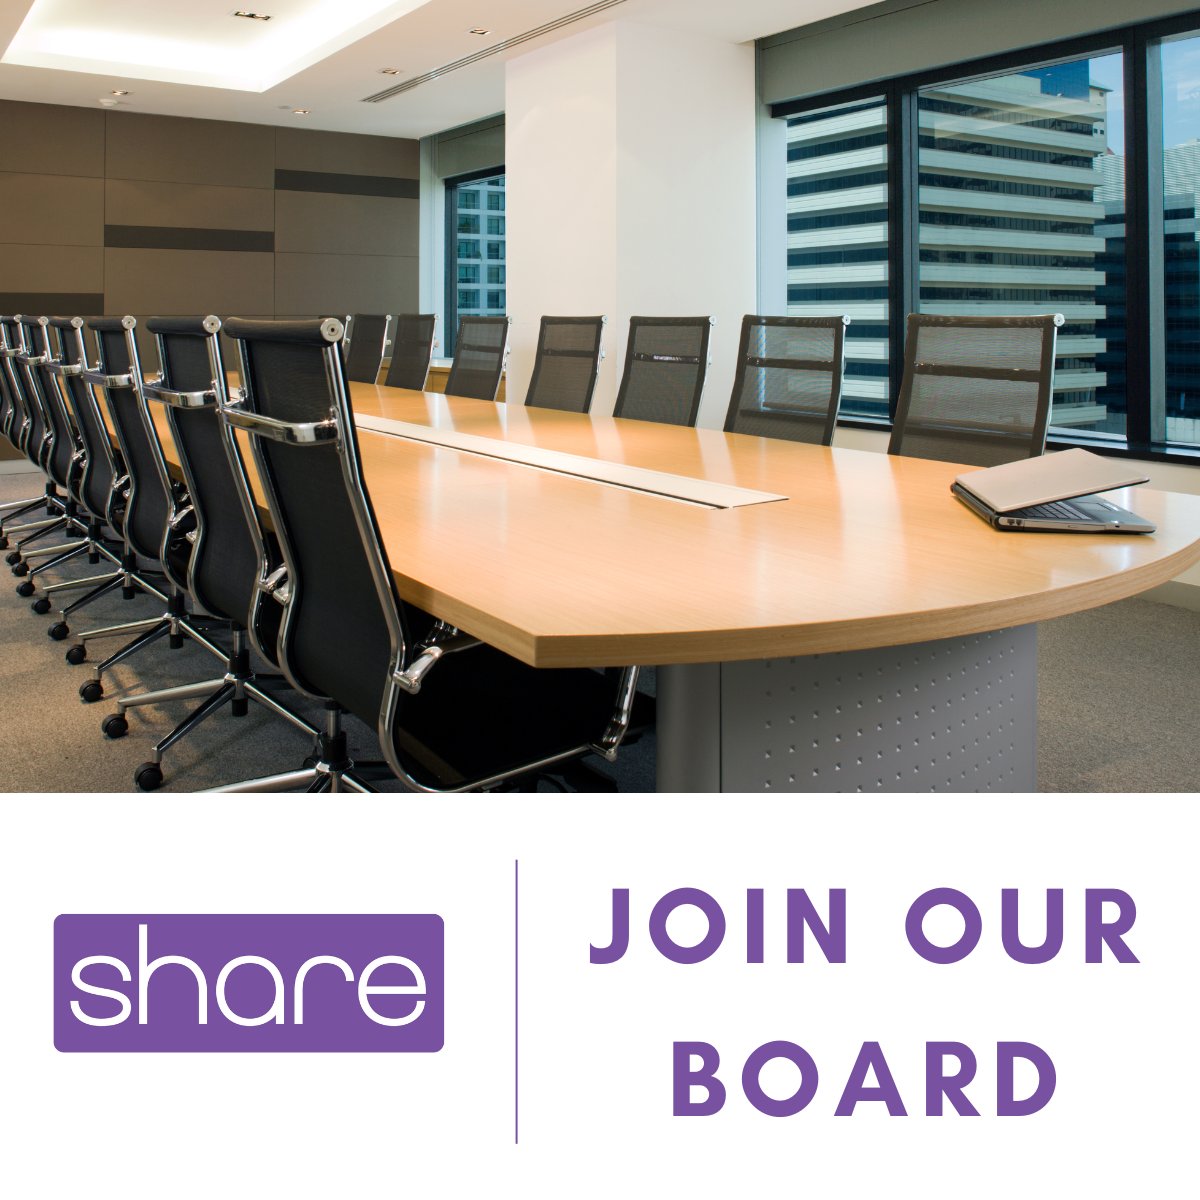 👀 Share is on the lookout for new Board Members. Get in touch if you've got experience in: 🏘 The social housing/private sector 📚 Housing education/training and development 💰 Finance and budget control 💻 IT skills 🤝 Membership bodies Find out more lght.ly/79mli39